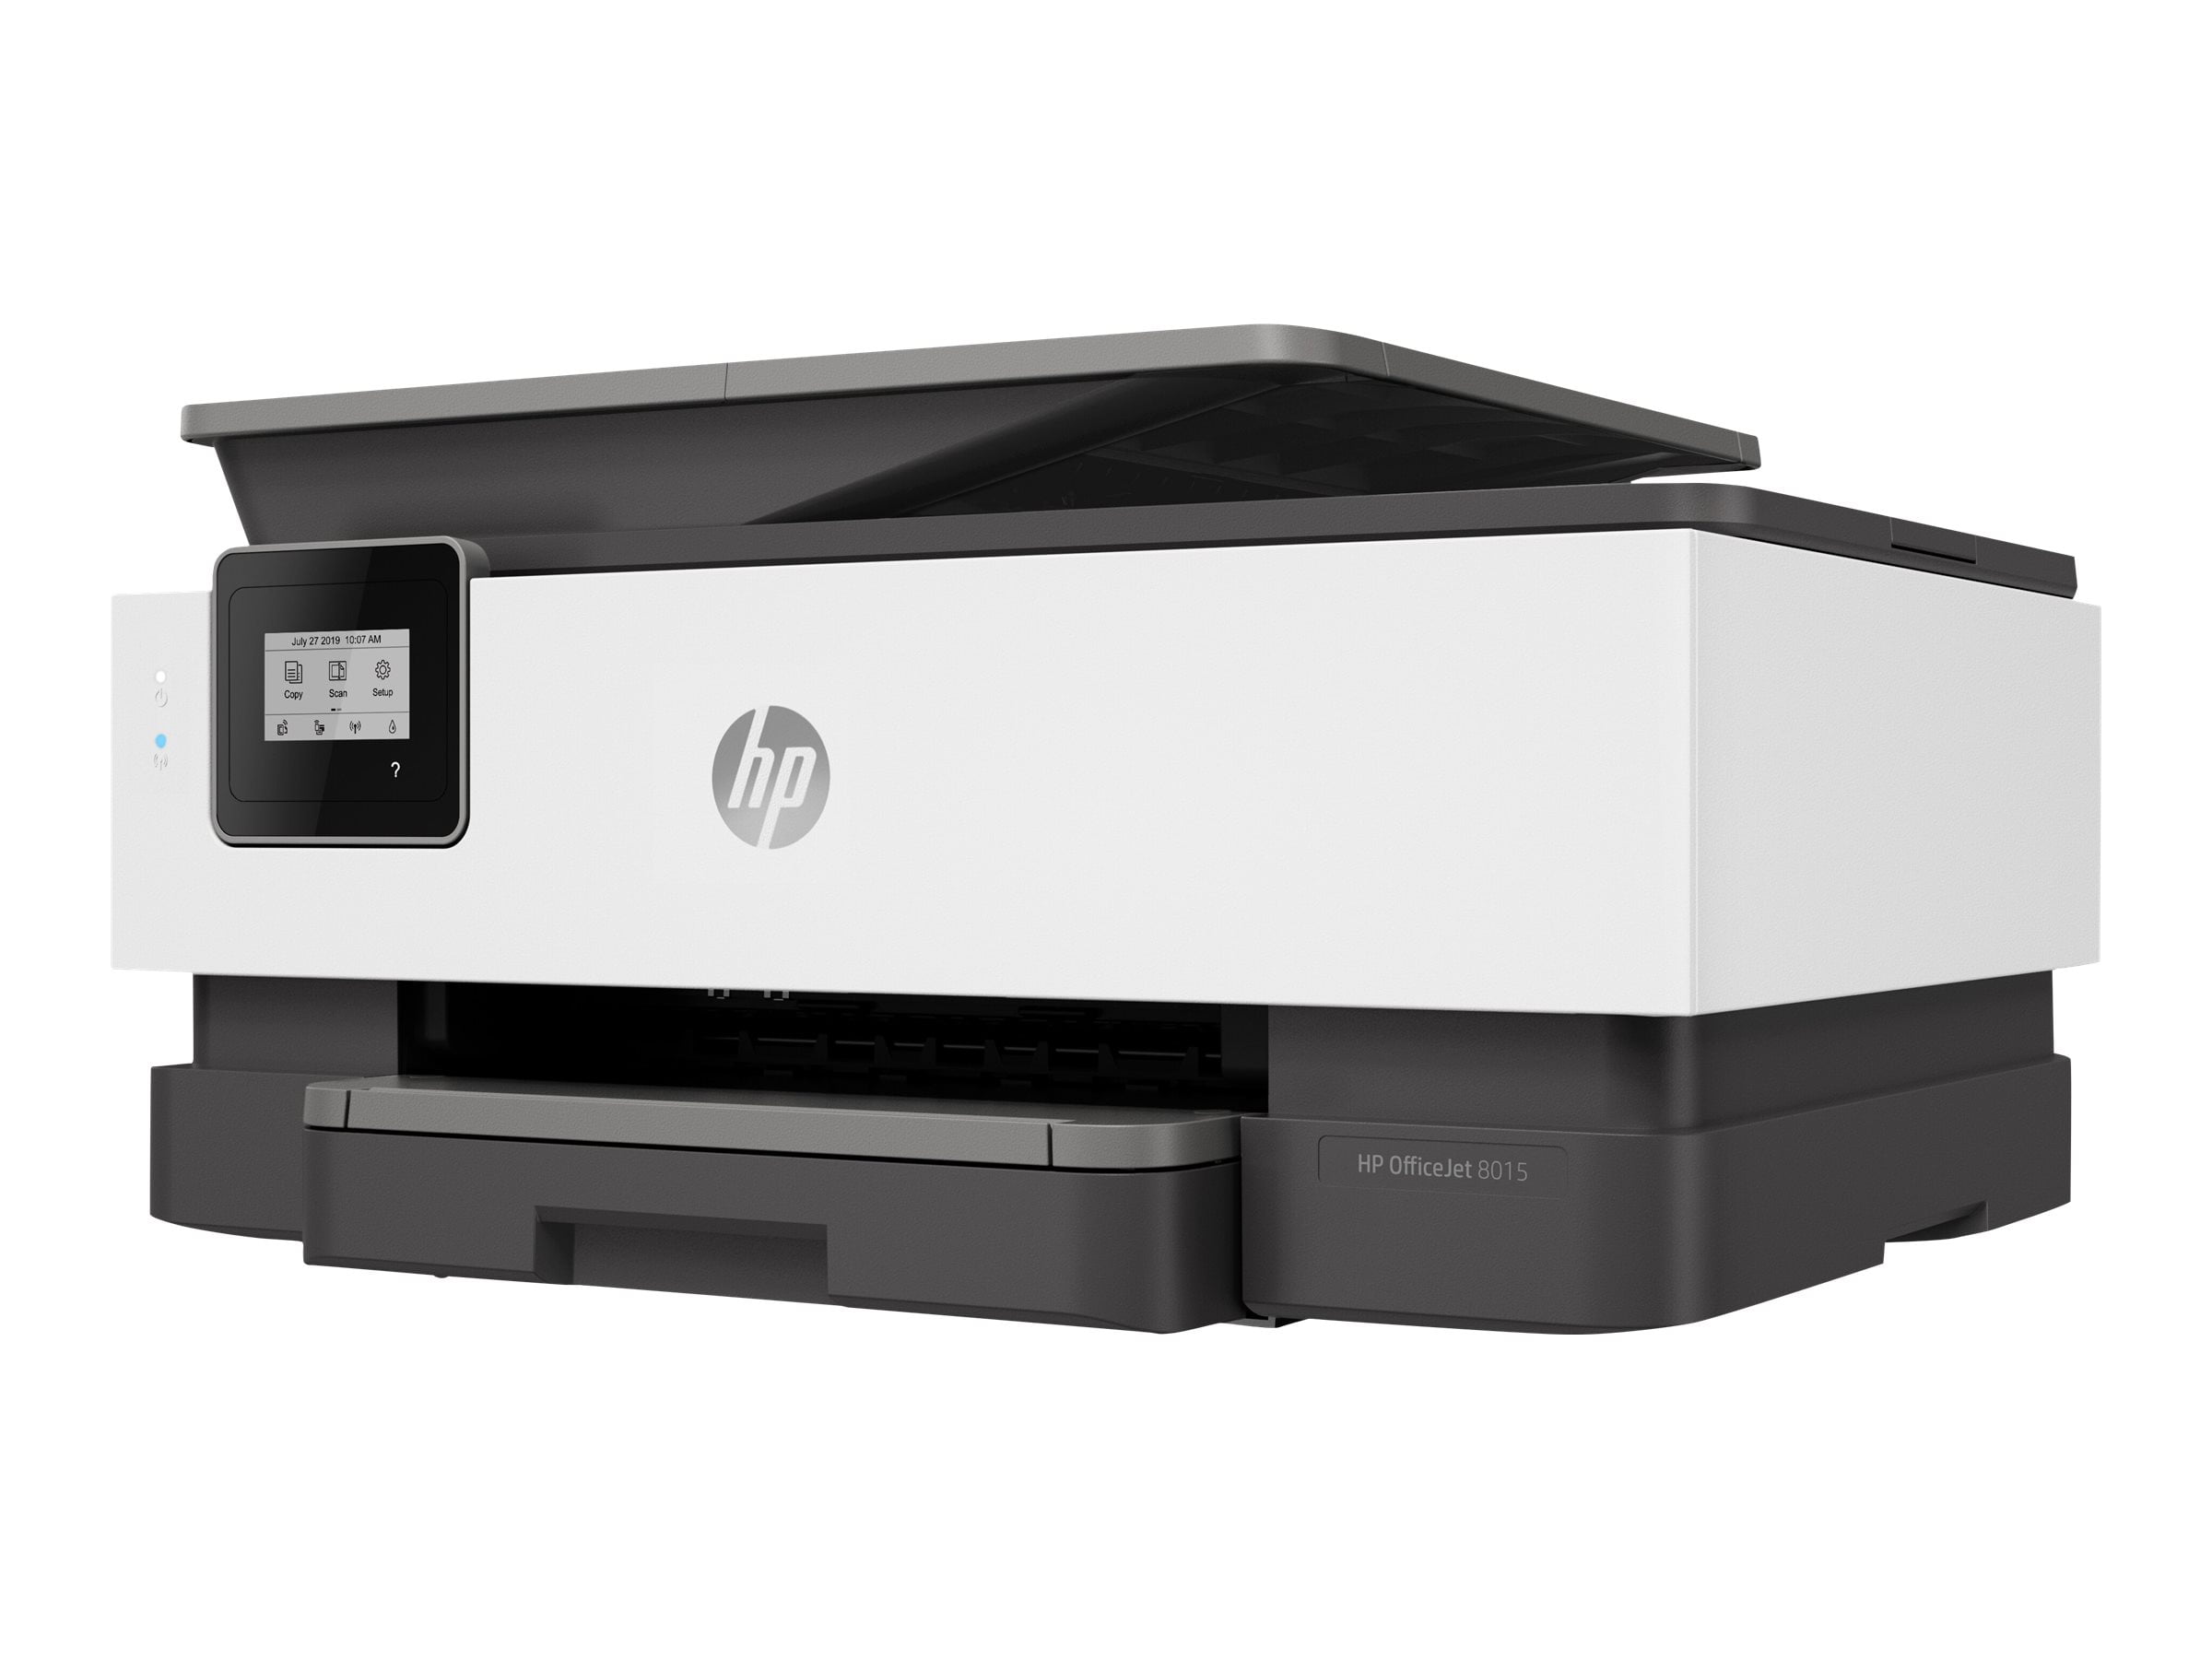 HP OfficeJet 6950 Printers - Copying Documents or Photos